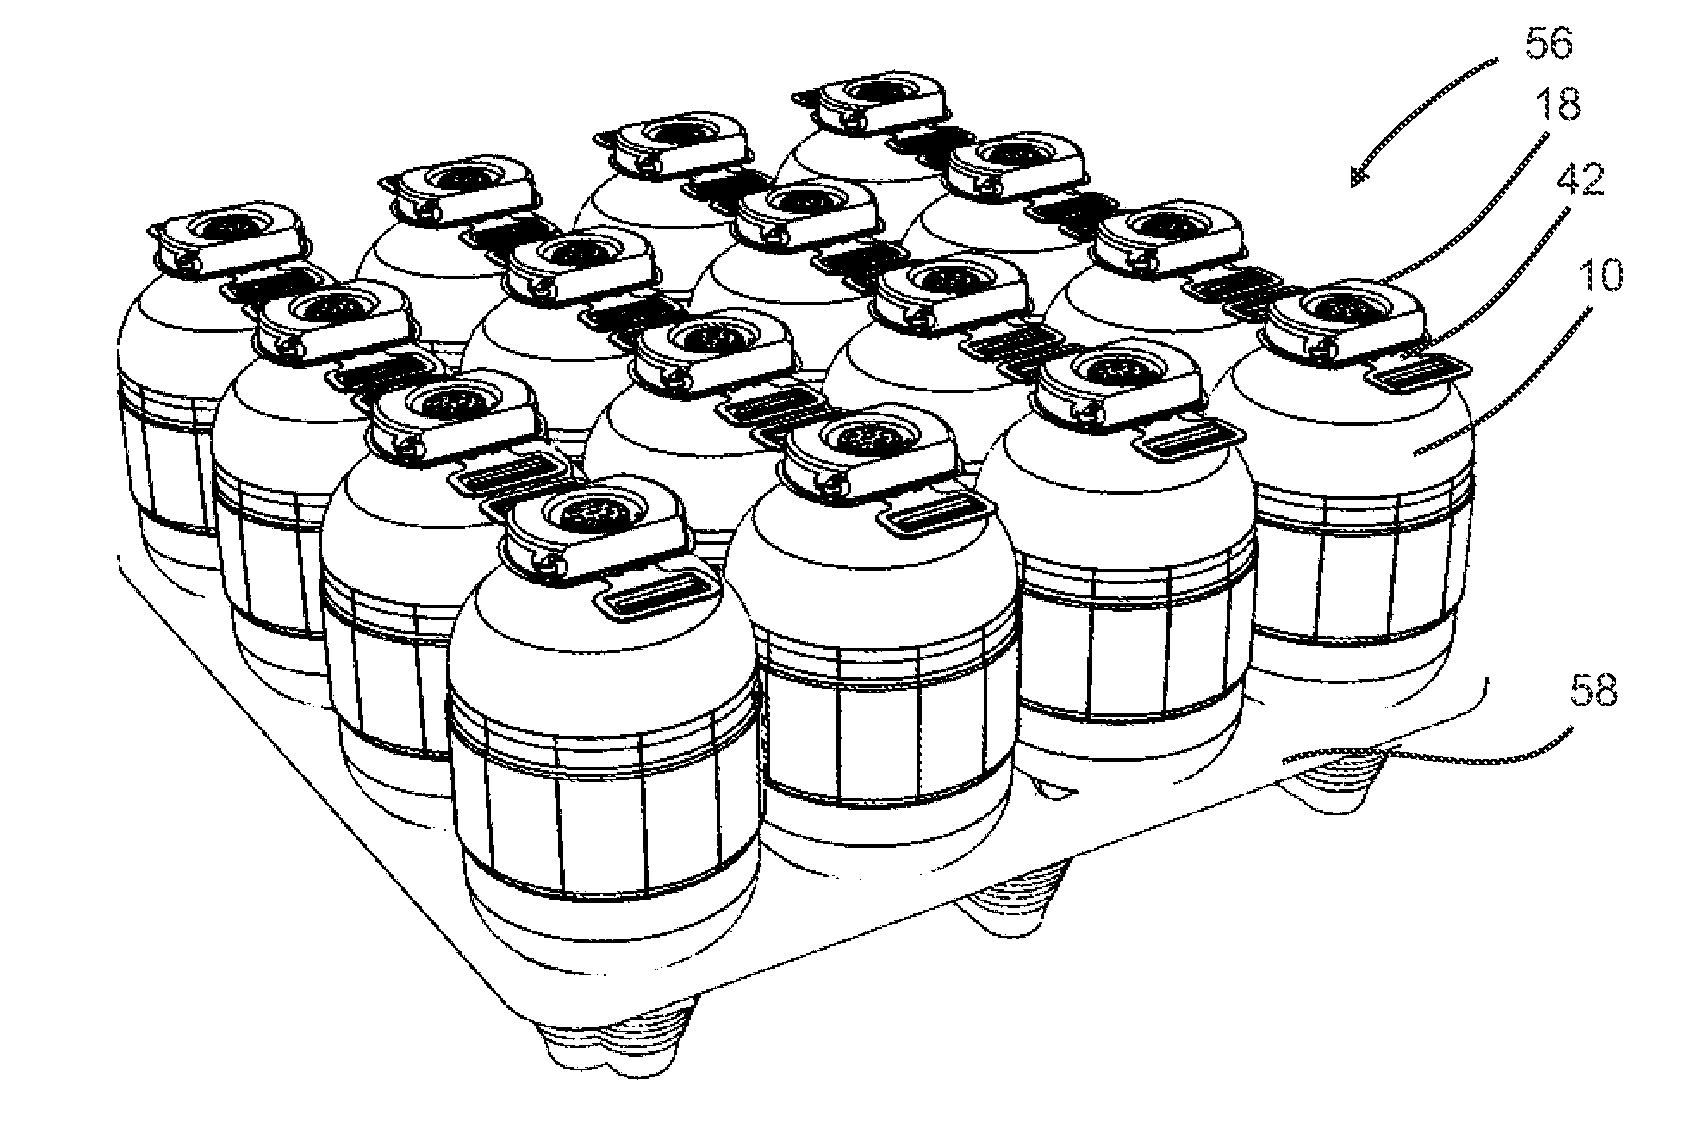 Method for producing containers filled with a liquid